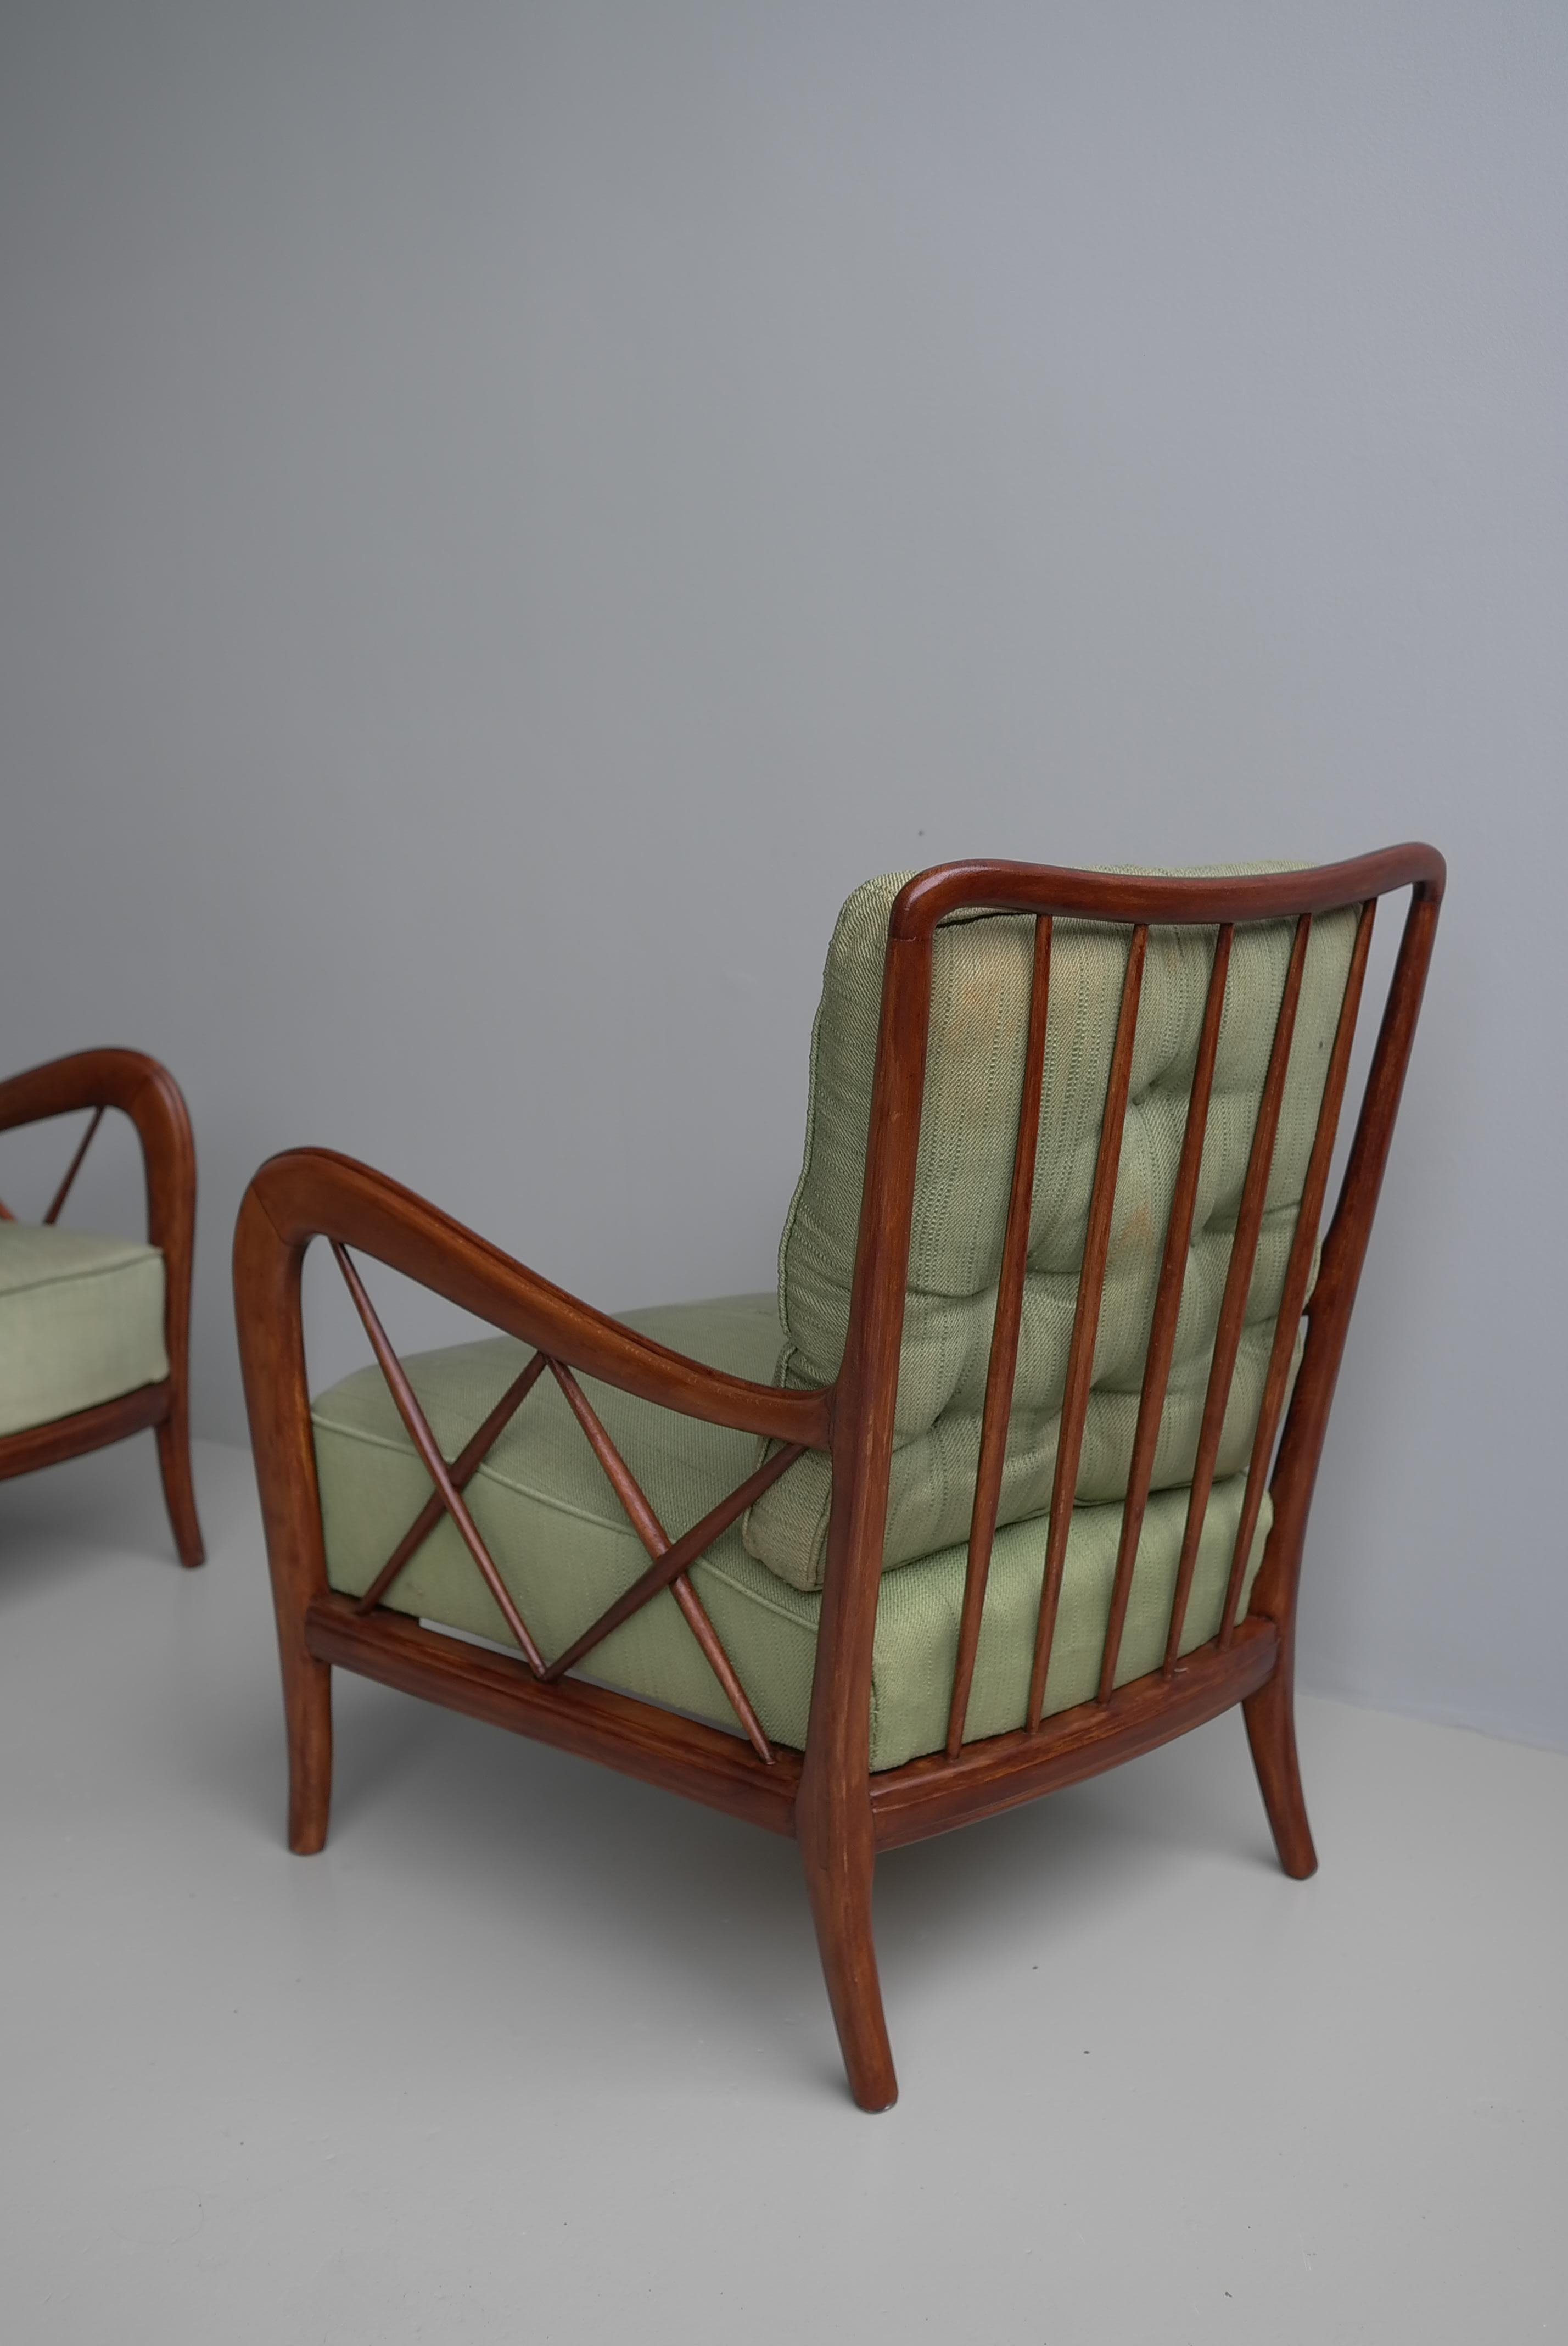 Mid-20th Century Walnut Wooden Lounge Chairs attr Paolo Buffa, Milan Italy 1940's For Sale